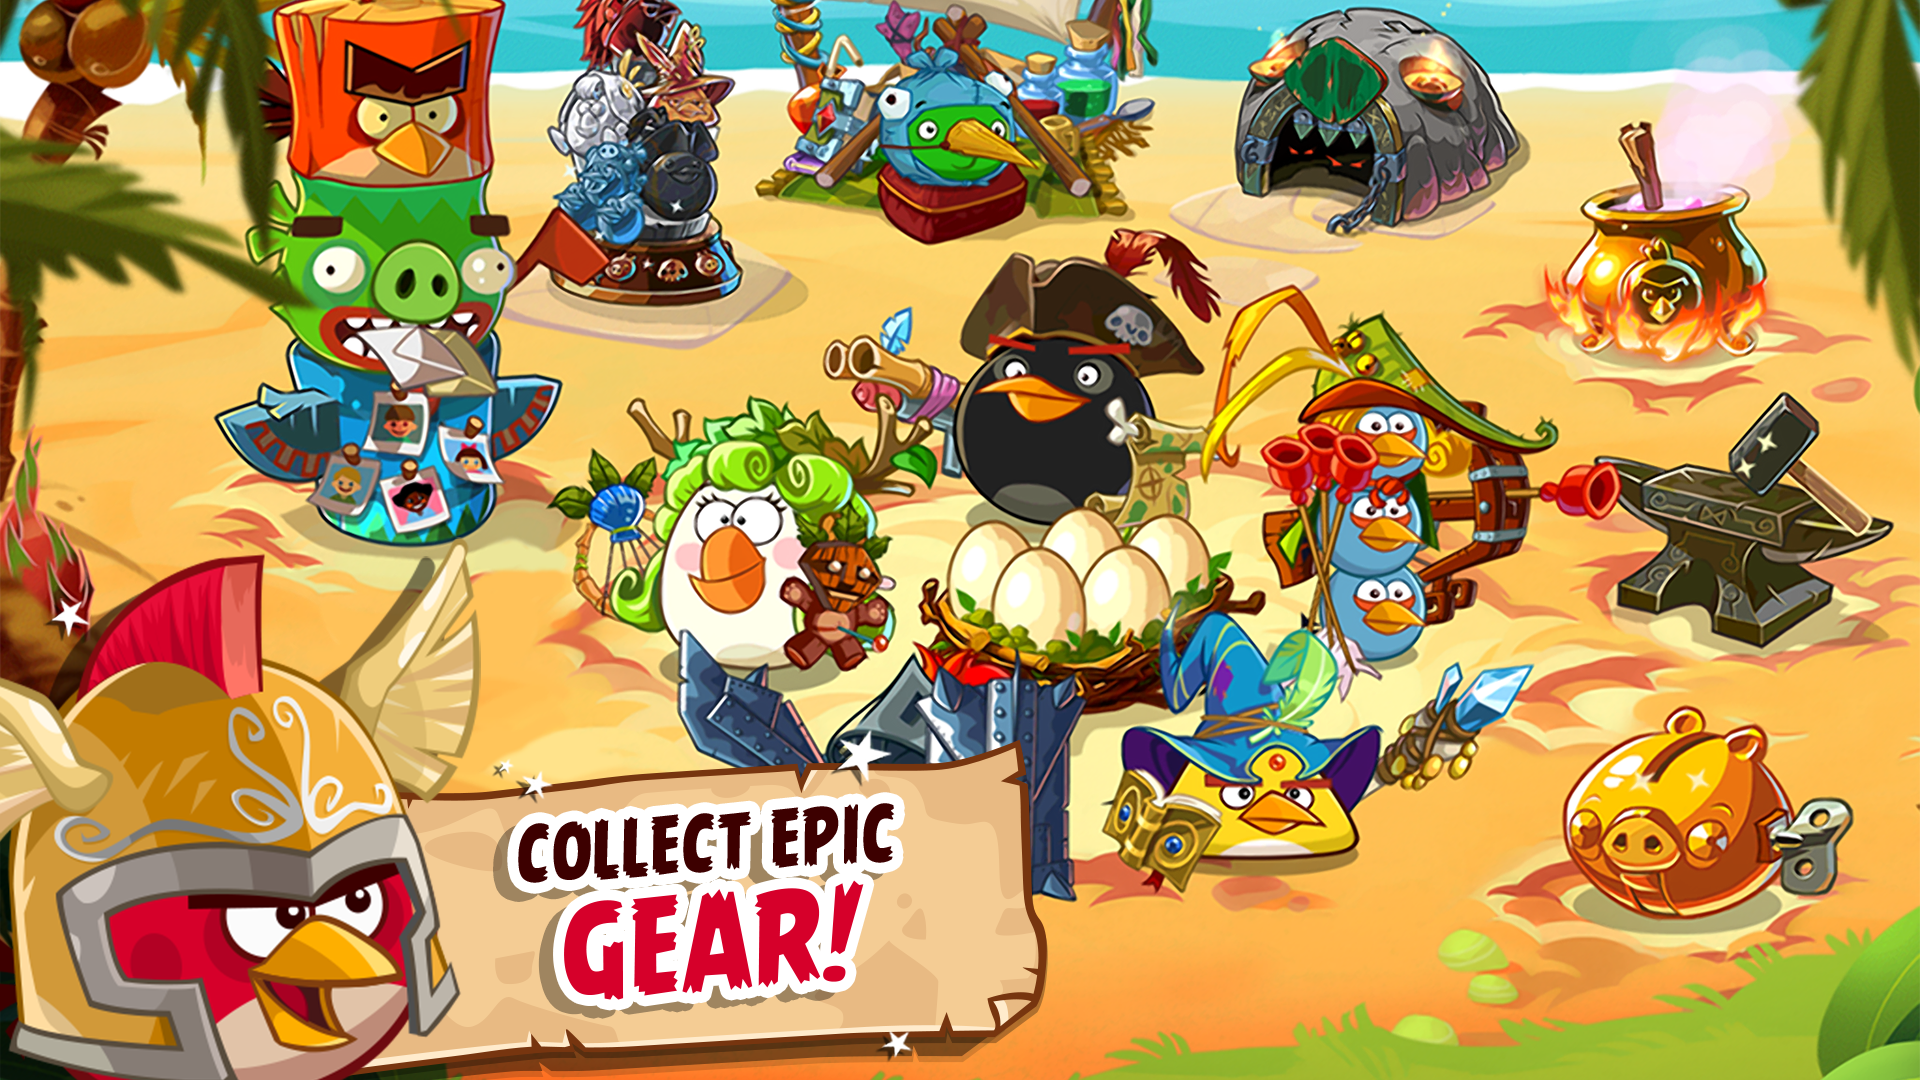 angry birds epic game